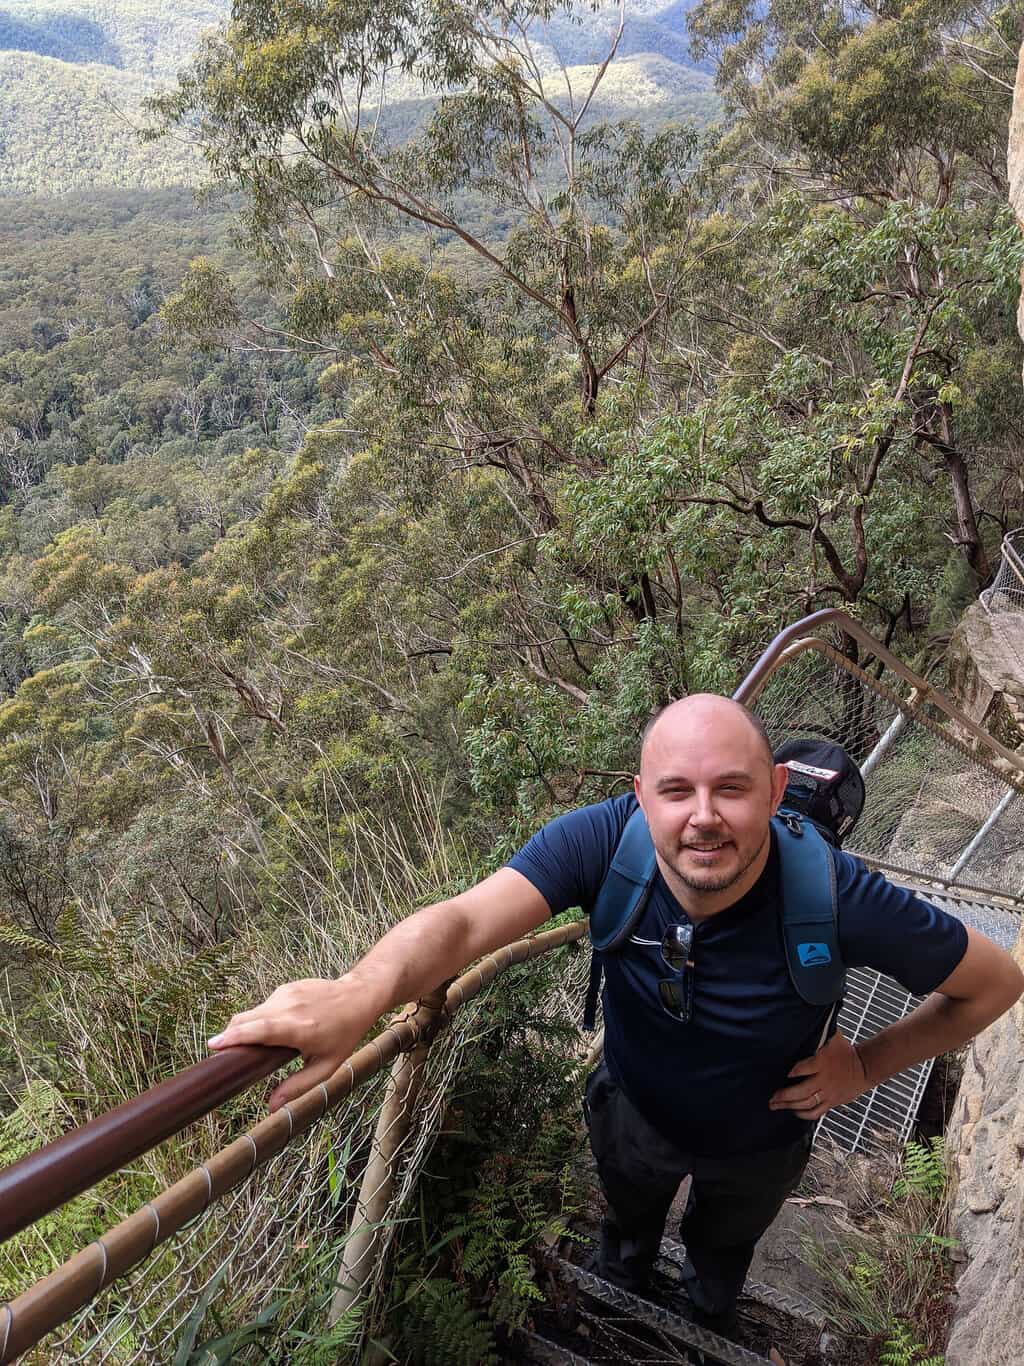 Climbing back up the mountain and above the treetops via the Giant Stairway in the Blue Mountains National Park